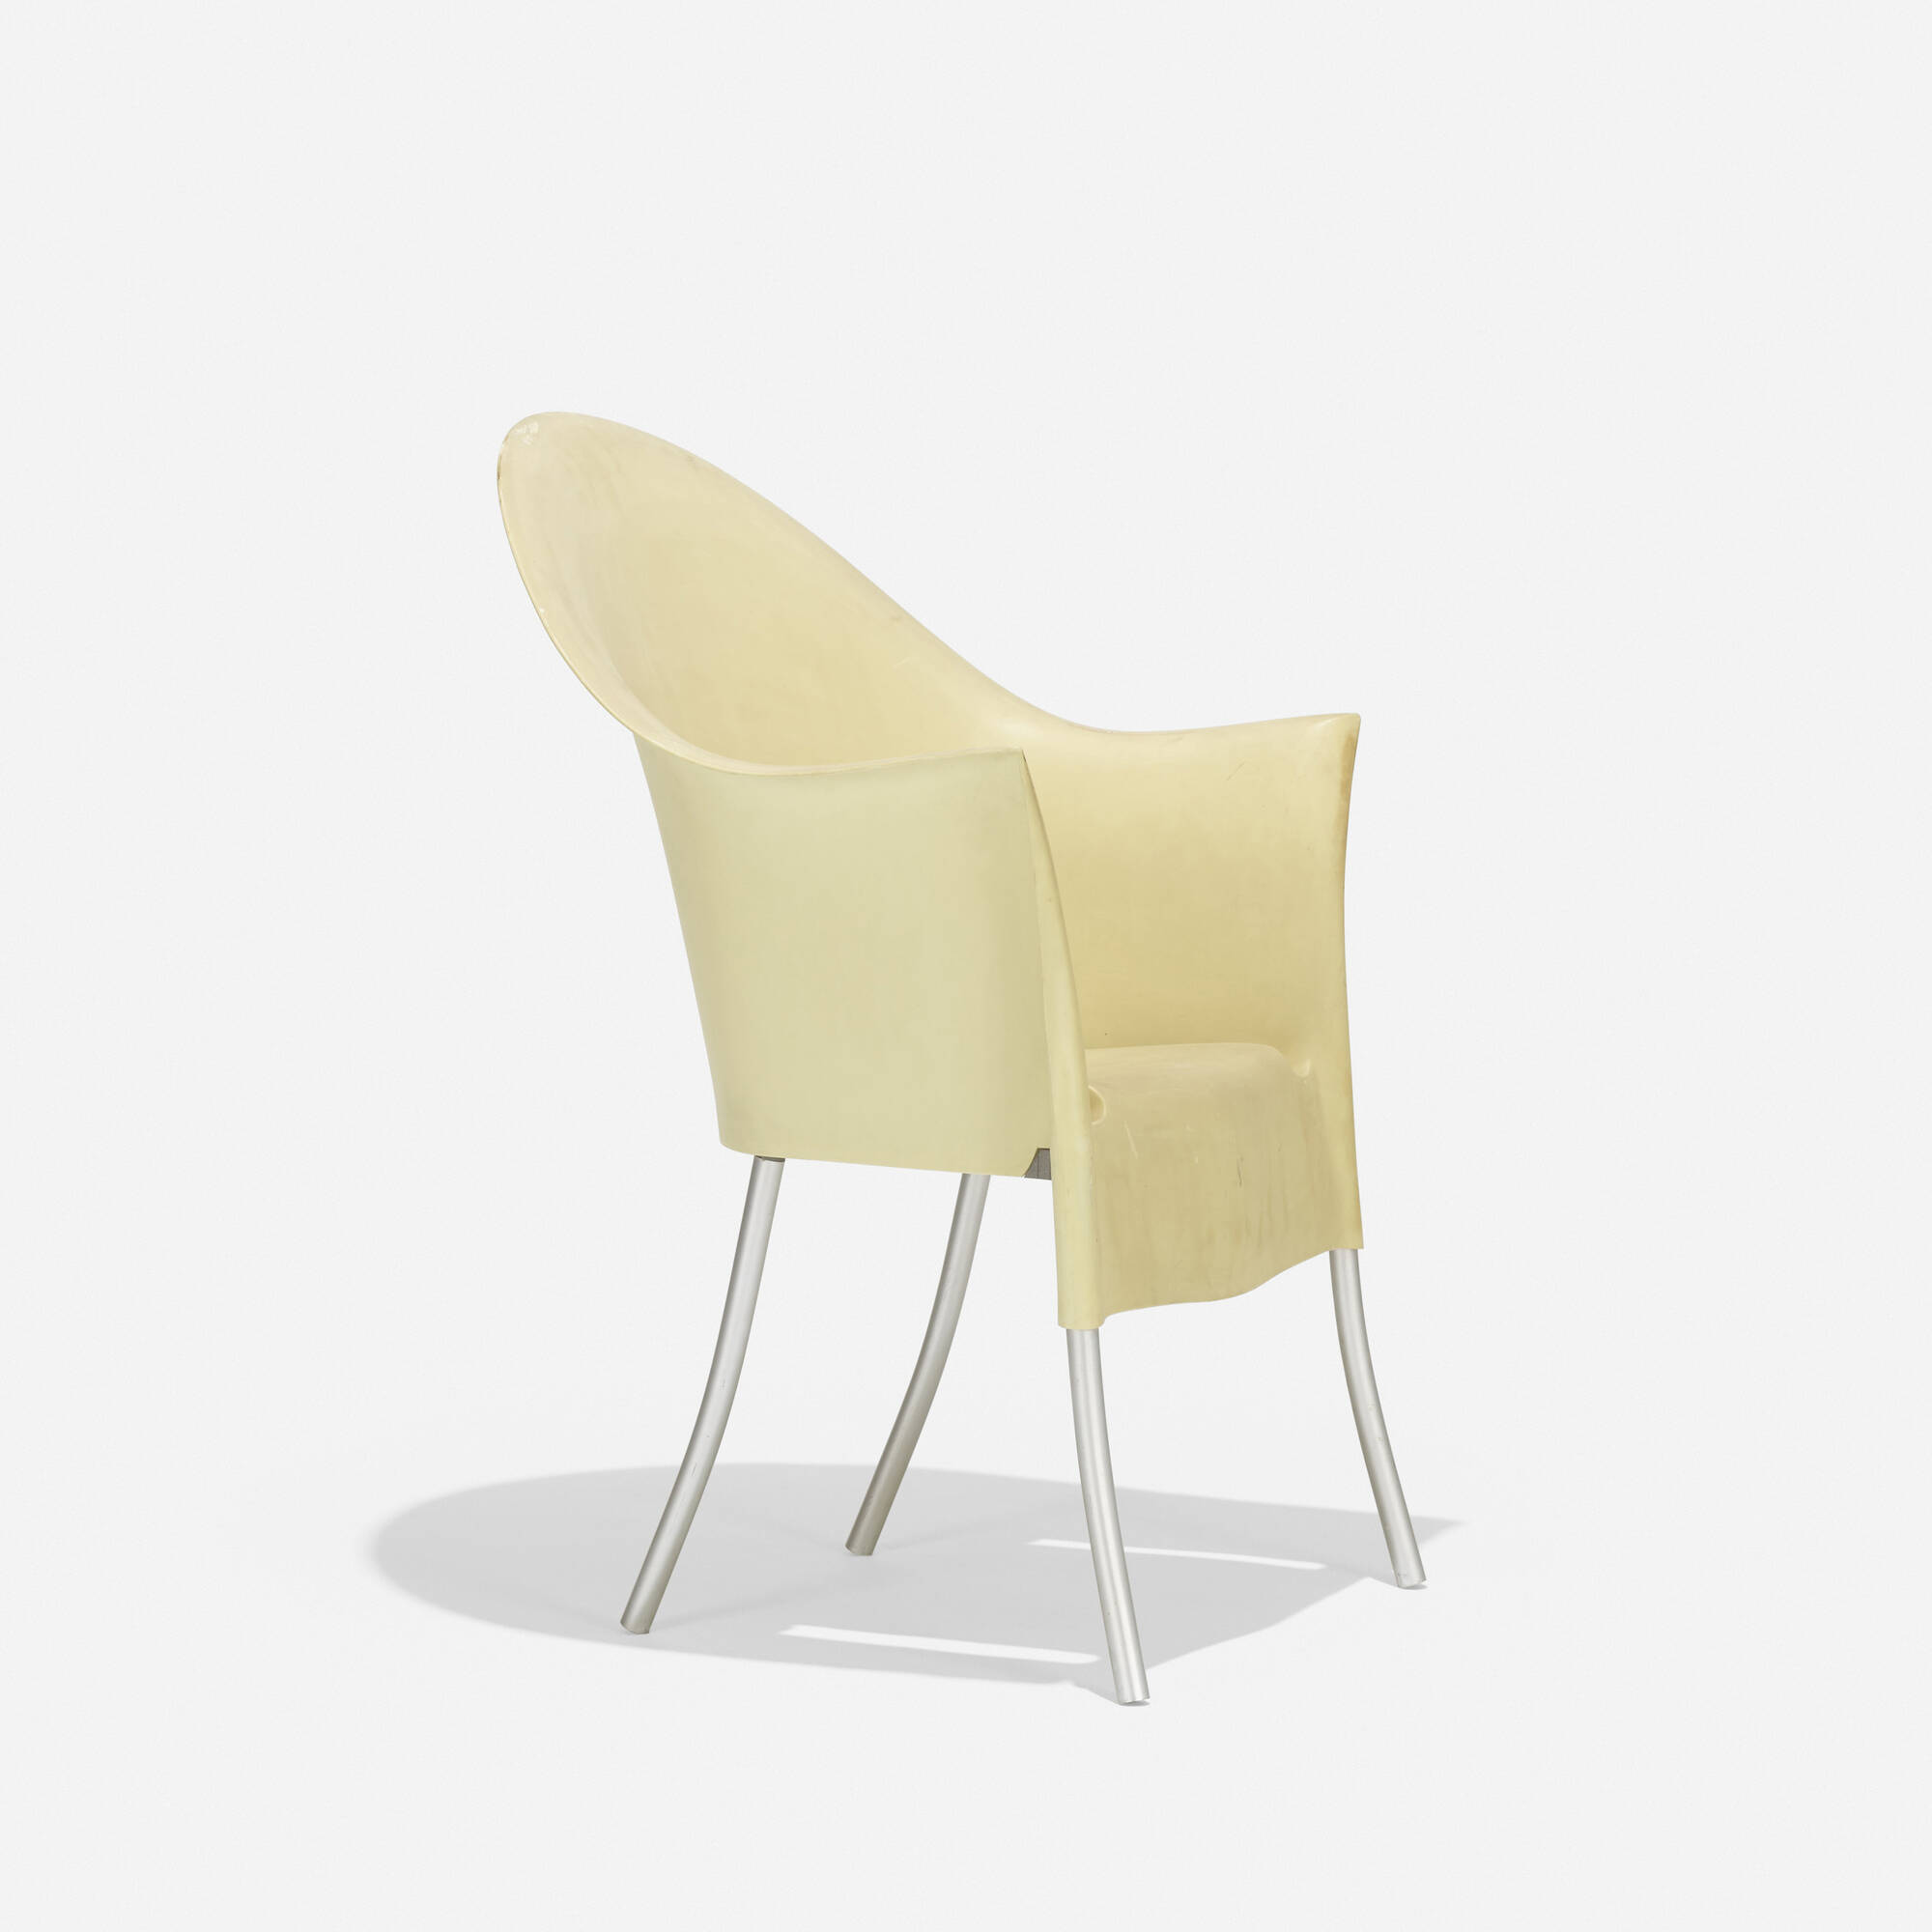 195 Philippe Starck Lord Yo Armchair Taxonomy Of Design Selections From Thessaloniki Design Museum 25 August 2016 Auctions Wright Auctions Of Art And Design